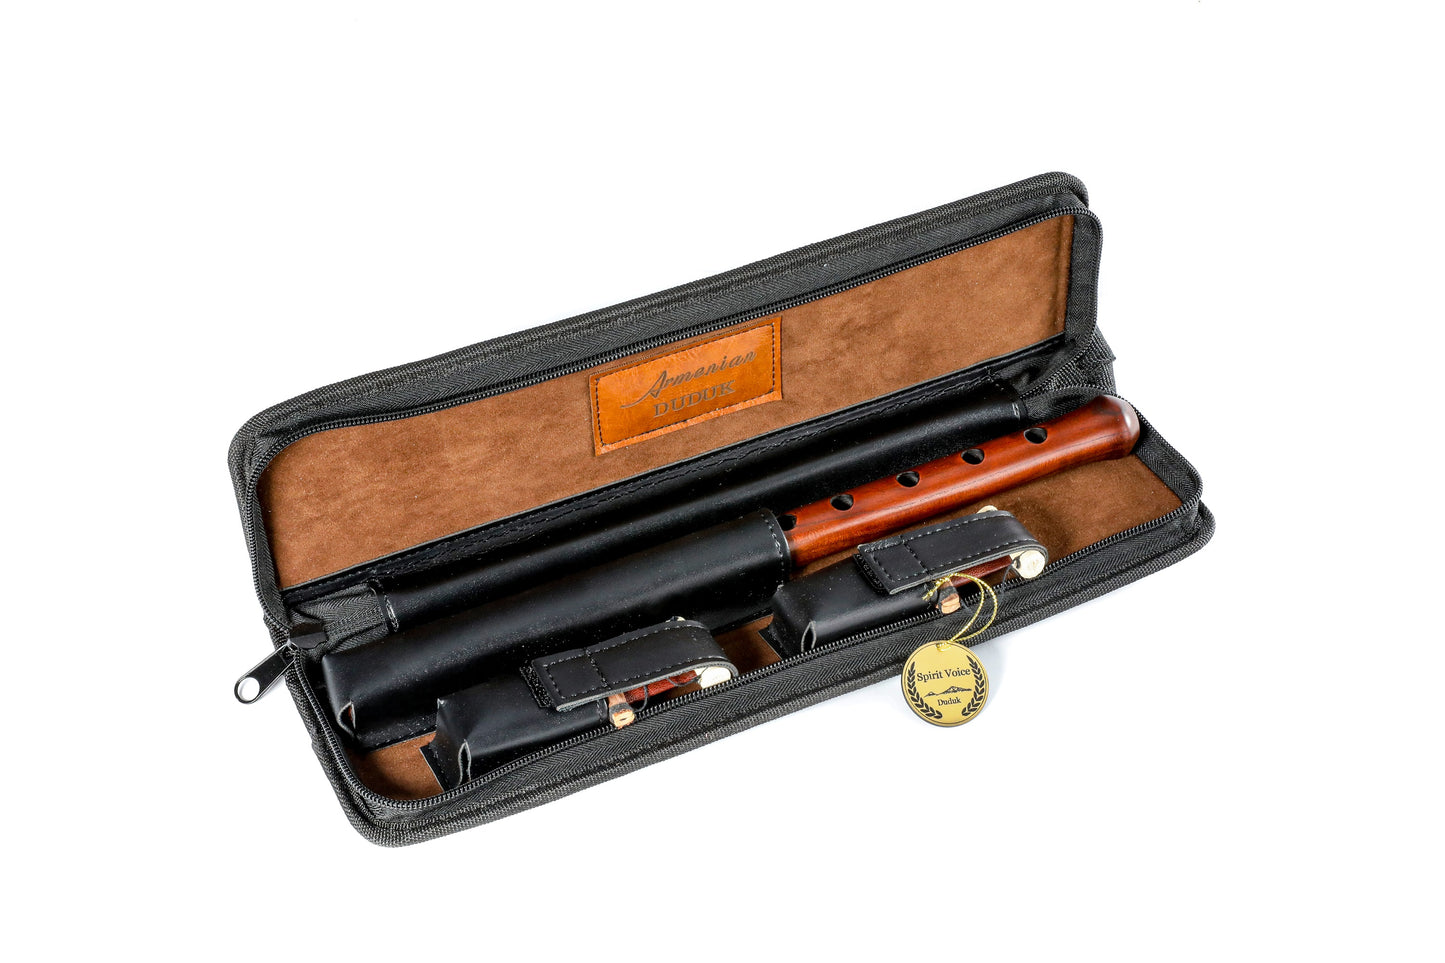 Armenian professional duduk with 2 reeds & leather case